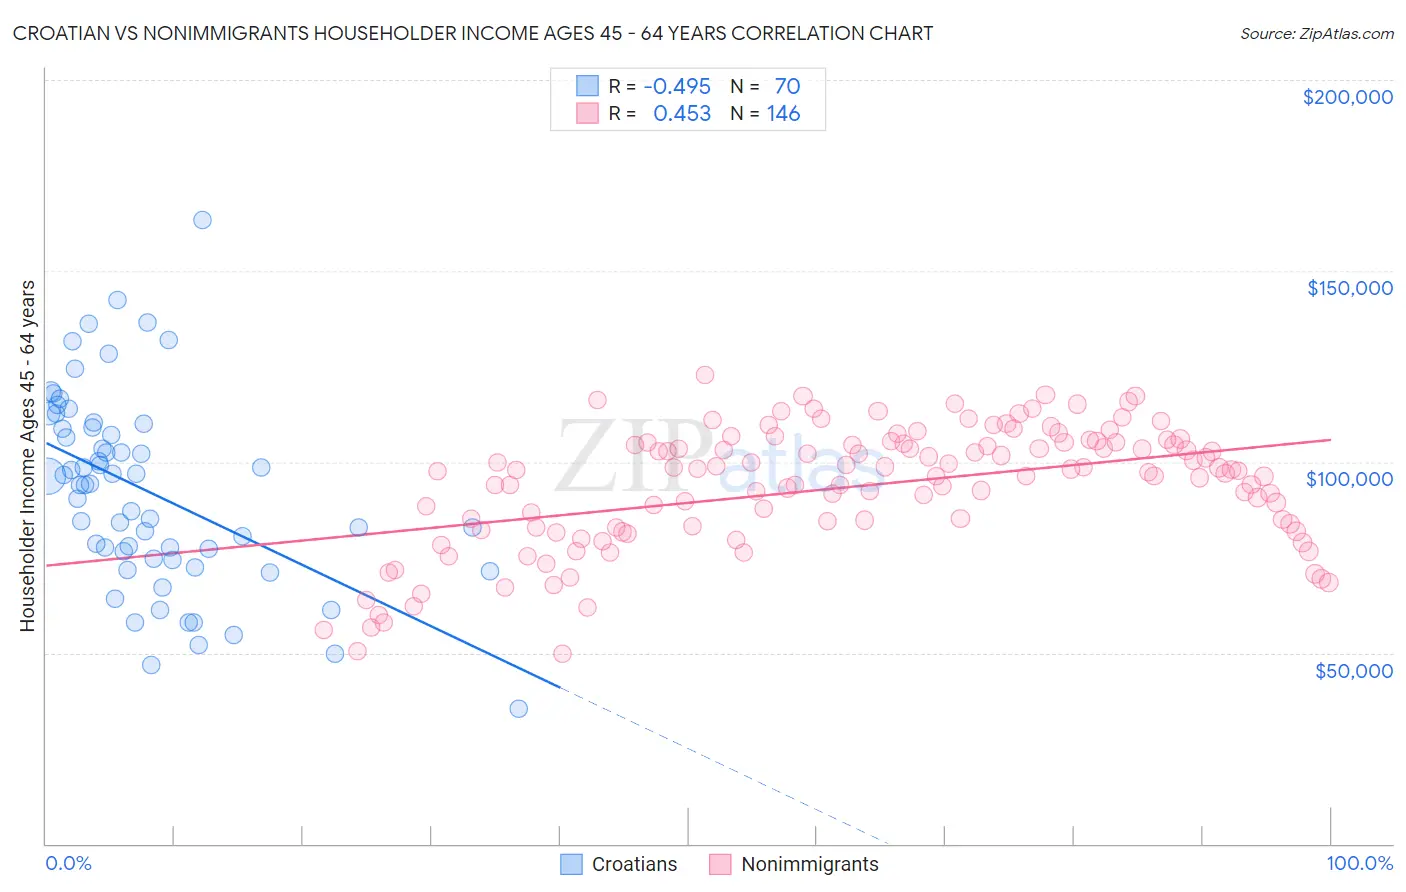 Croatian vs Nonimmigrants Householder Income Ages 45 - 64 years